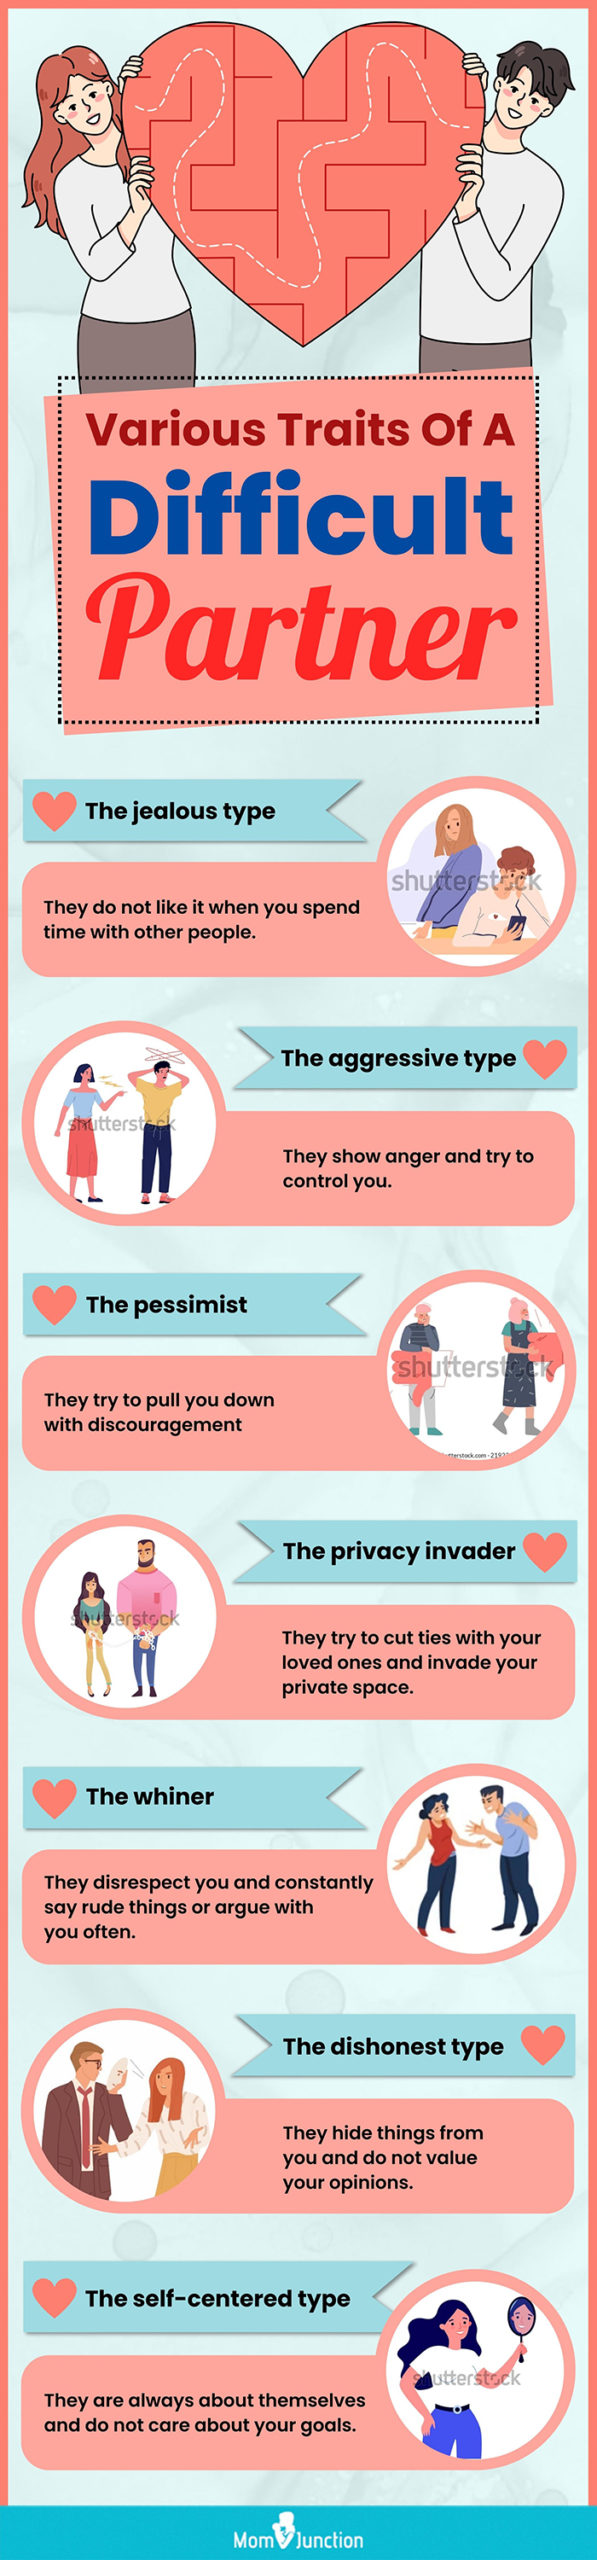 various traits of a difficult partner [infographic]